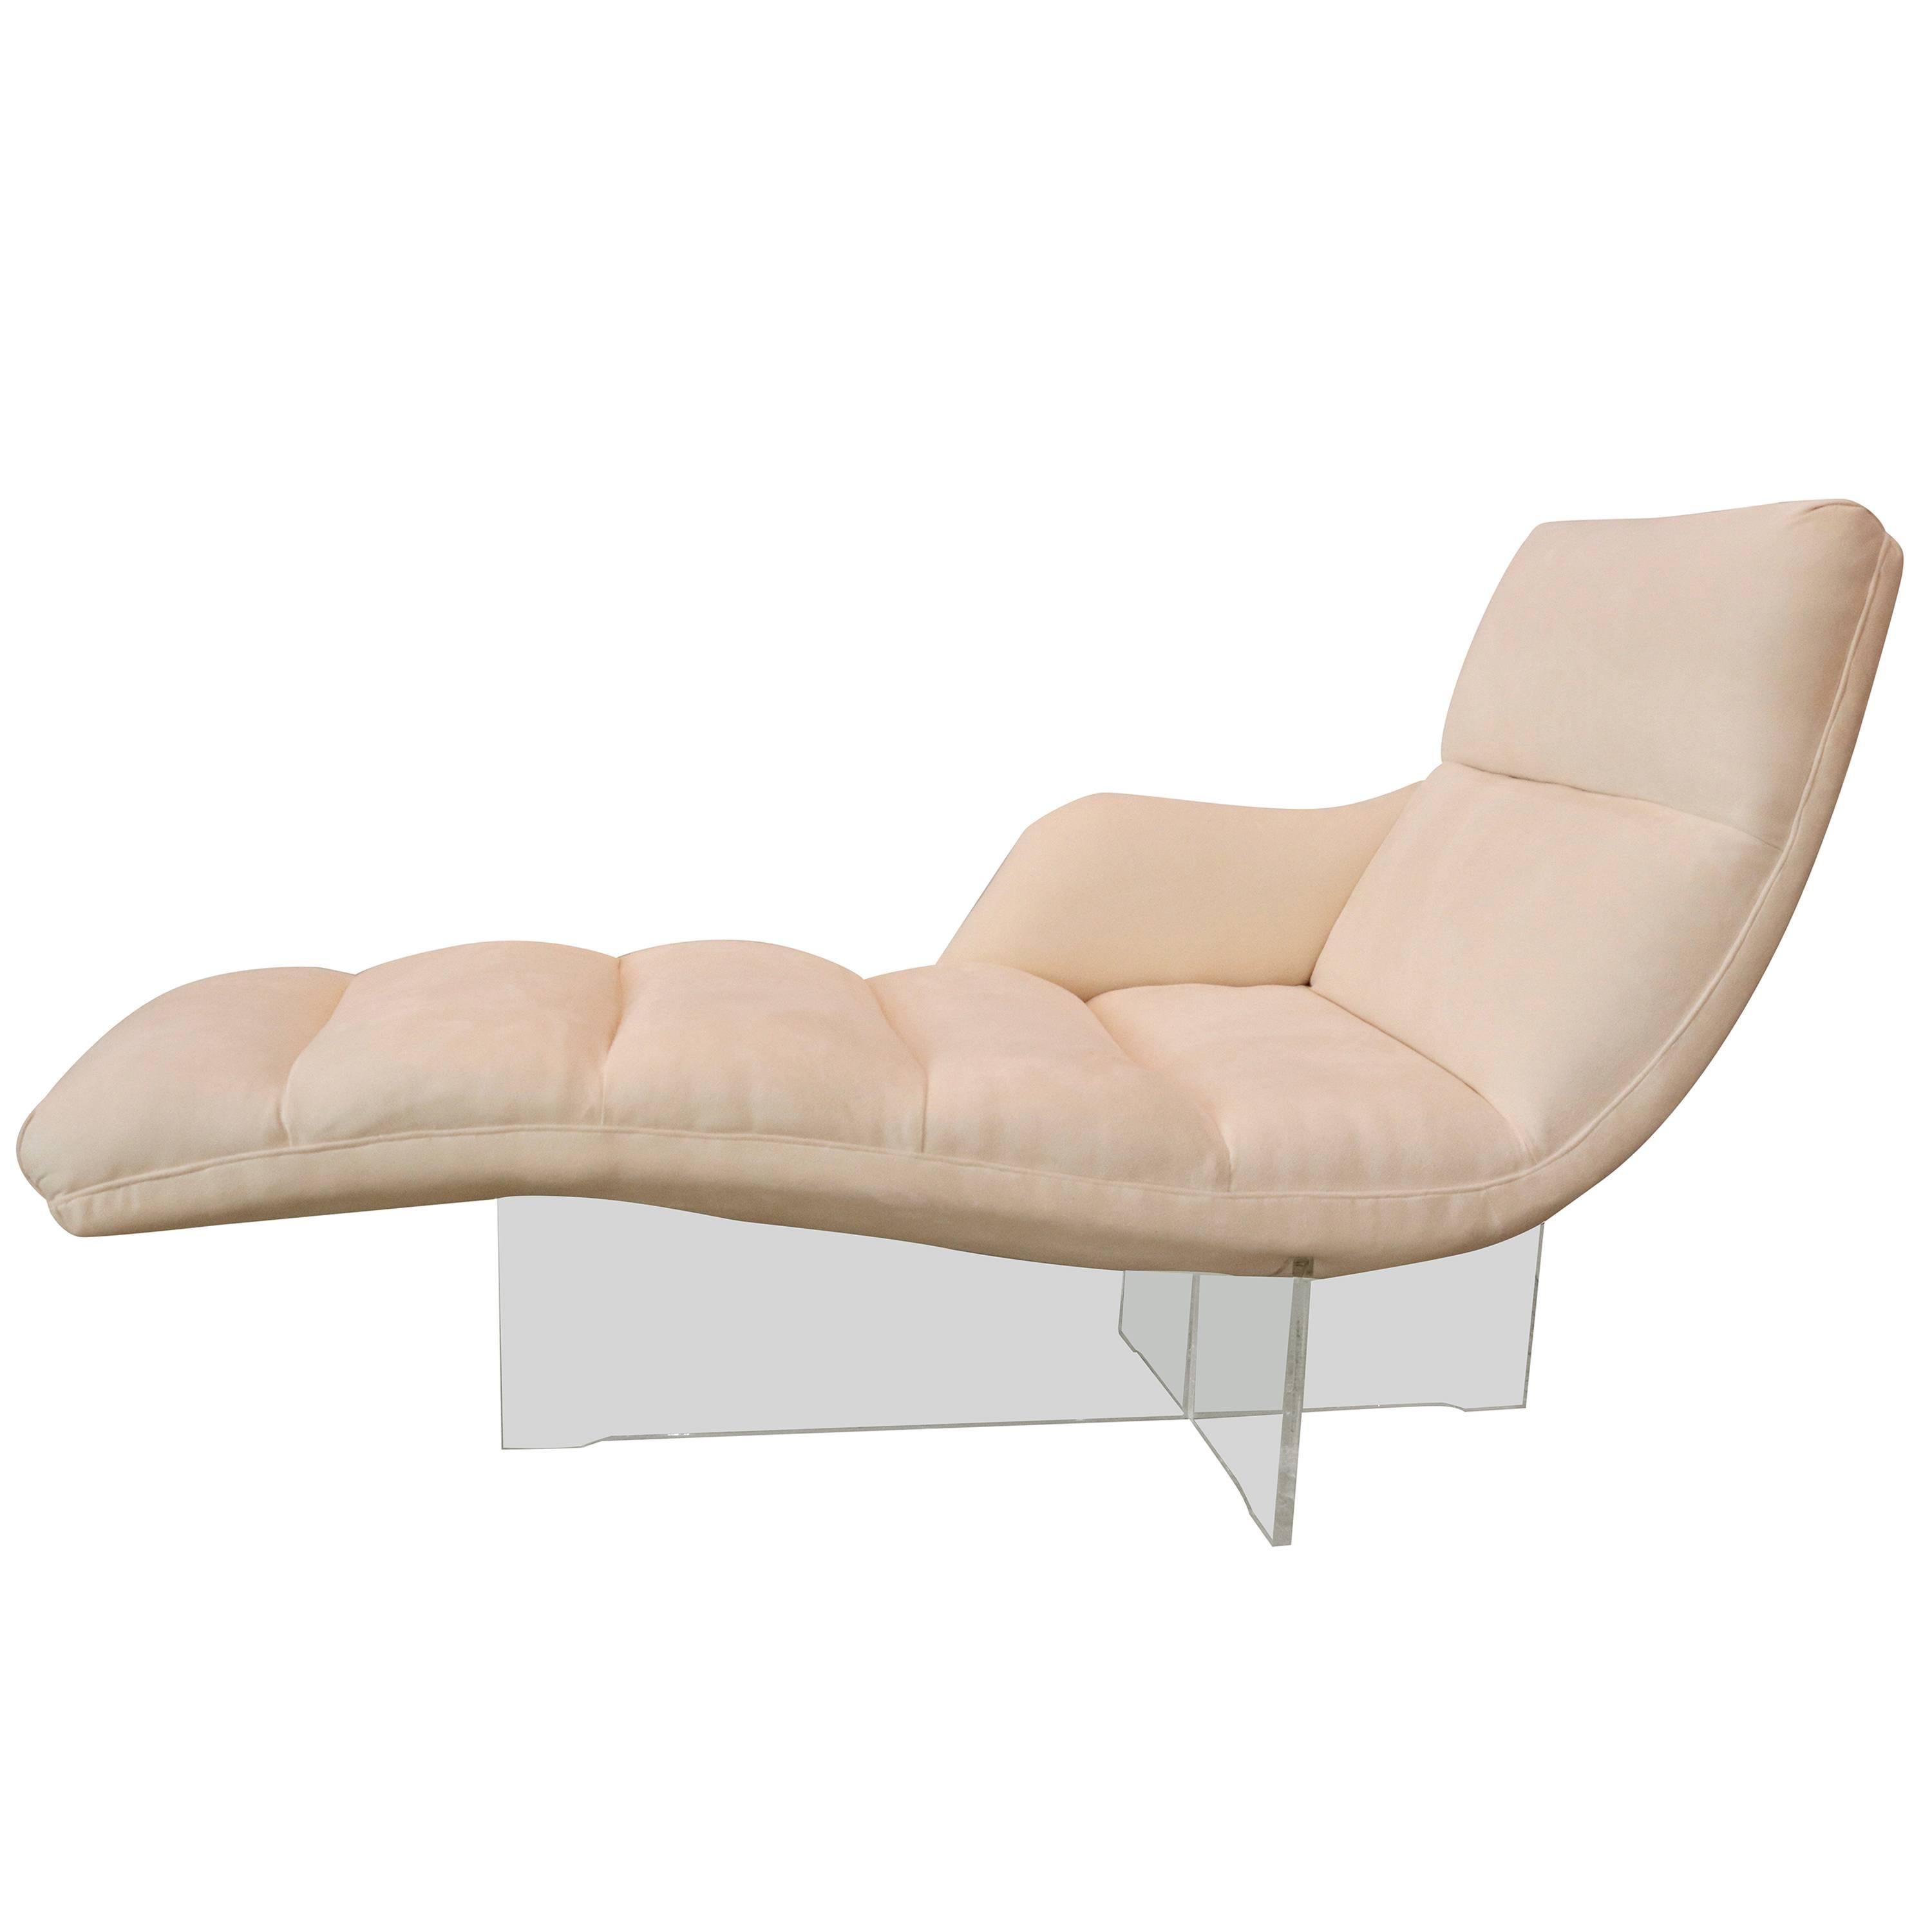 "Erica" Chaise by Vladimir Kagan in Lucite and Ultrasuede Upholstery